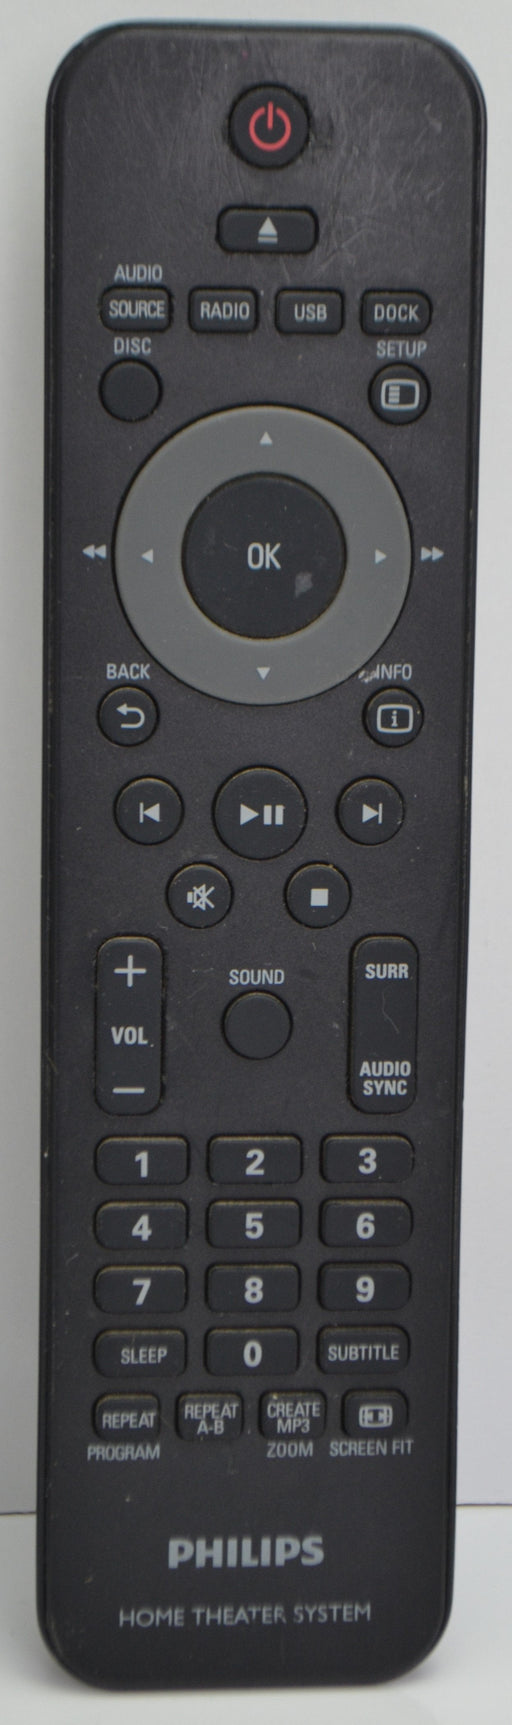 Philips IECR03 Home Theater System Remote Control-Remote-SpenCertified-refurbished-vintage-electonics